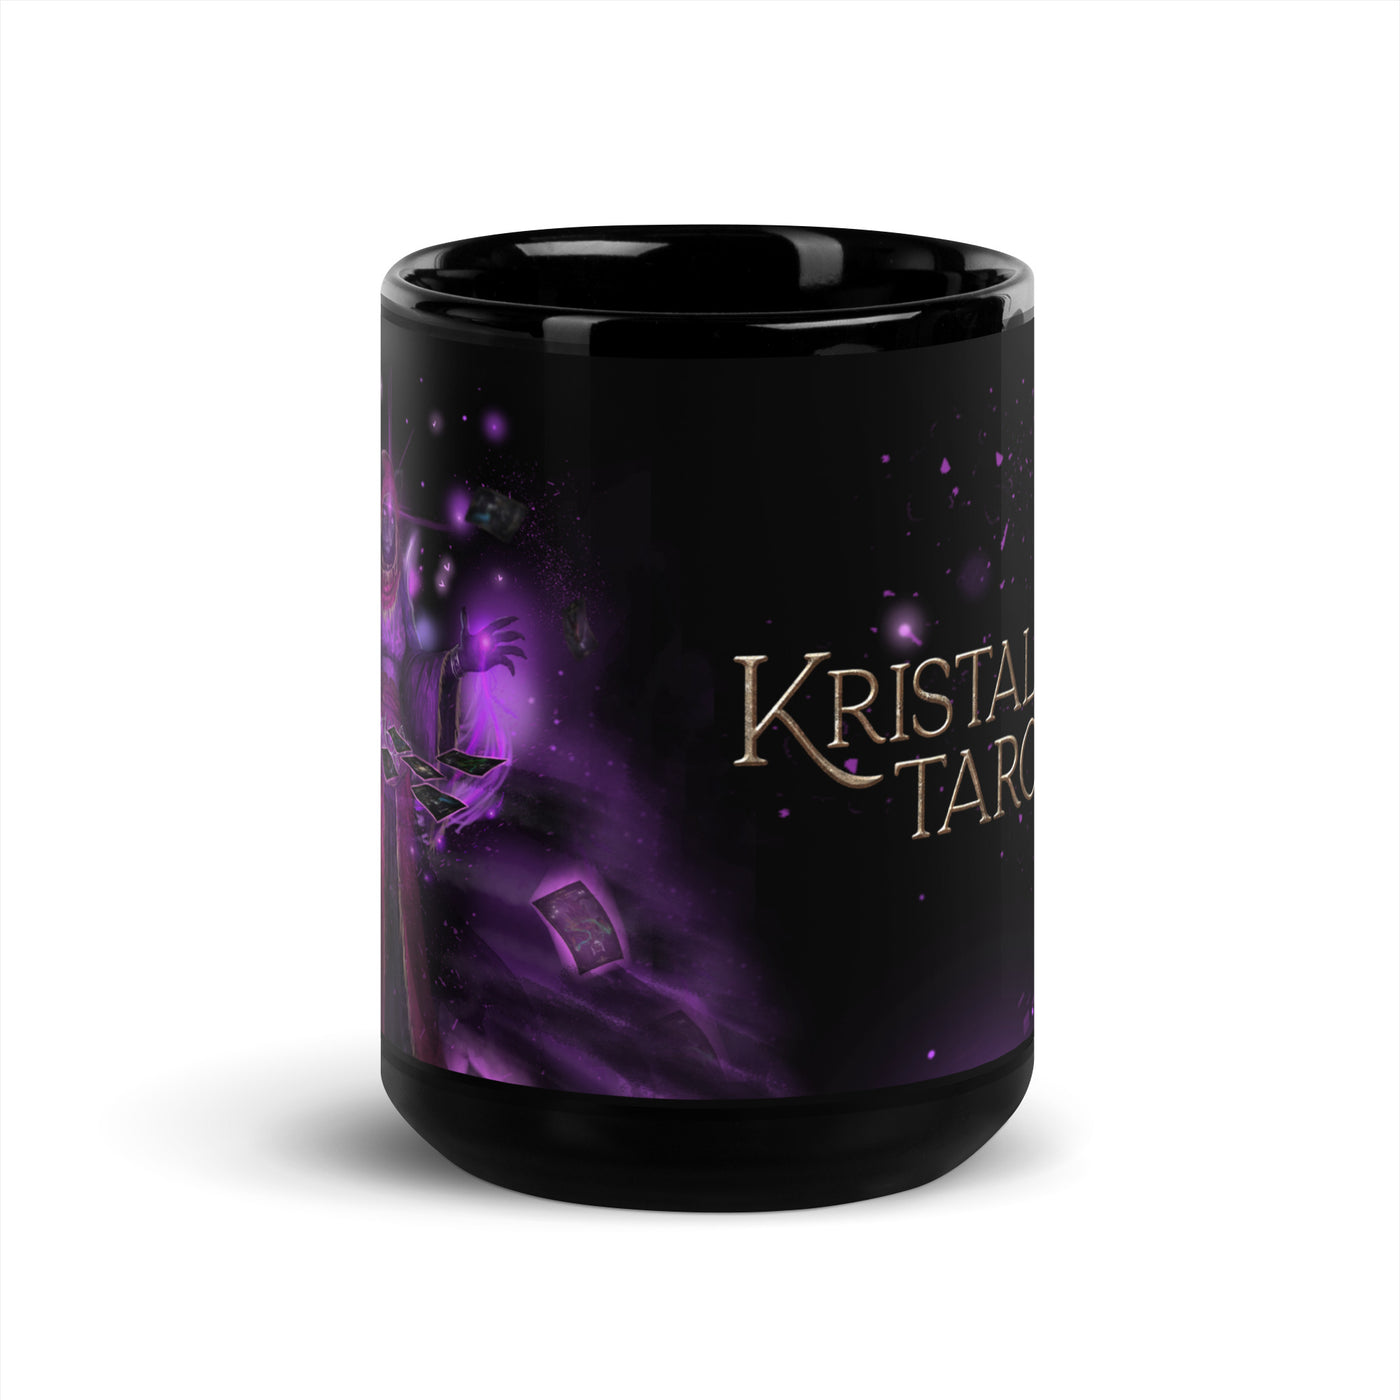 head-on front view of black ceramic coffe mug tea or tea mug with glossy finish and kristala tarot golden logo and inaze the cardkeeper tarot card spread graphic